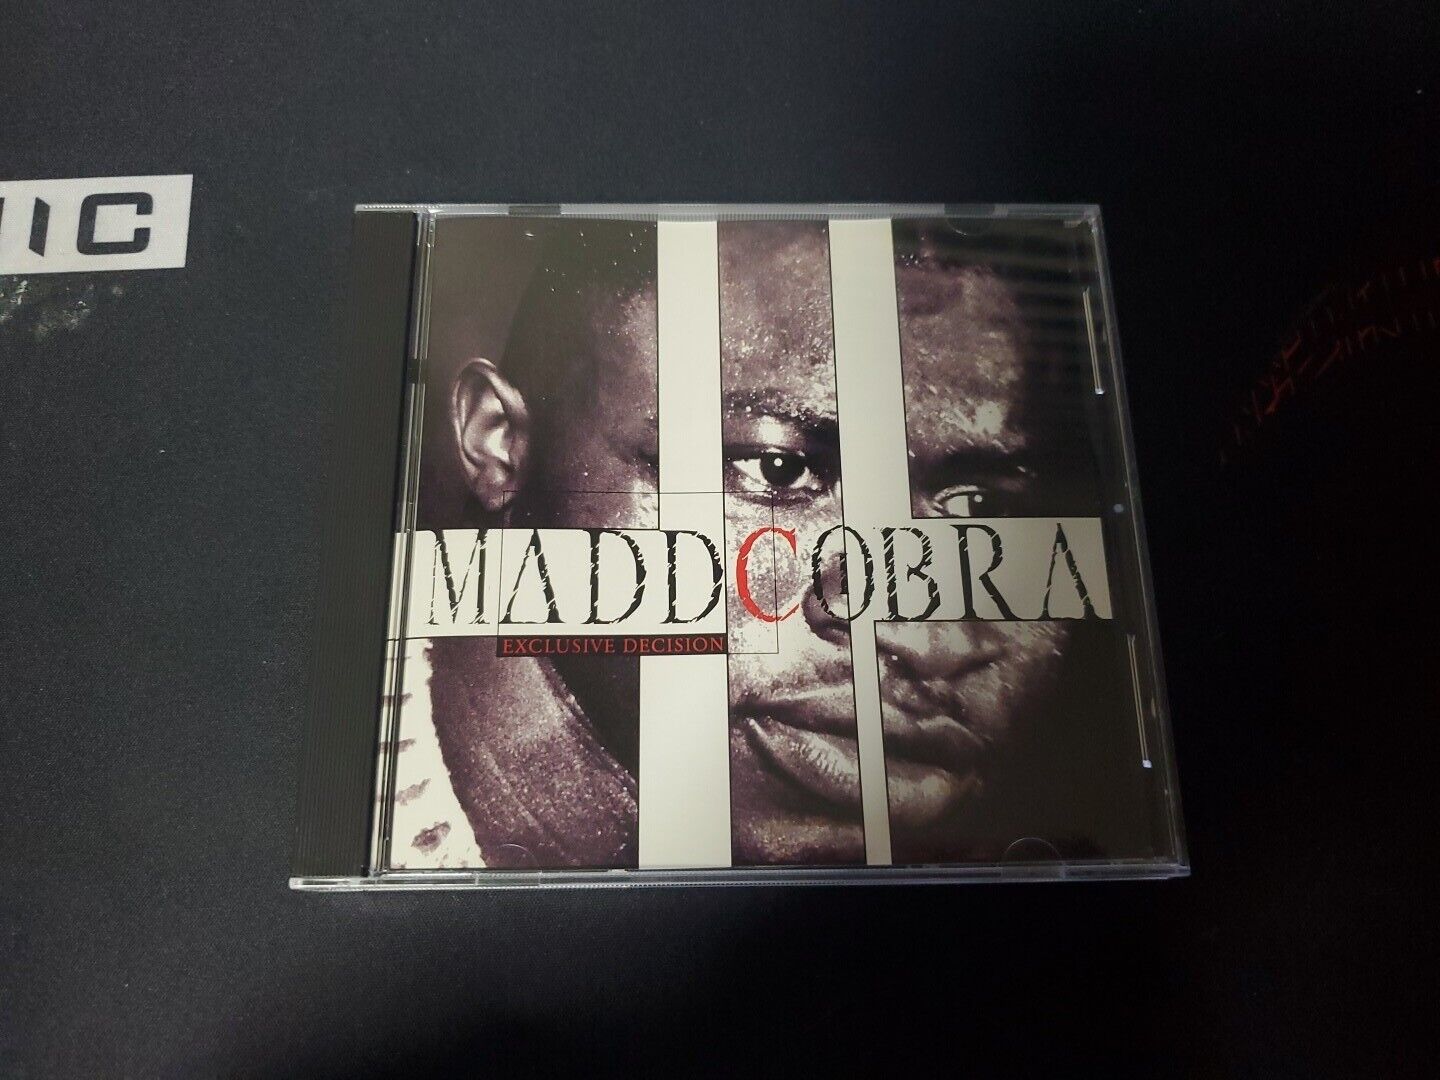 Exclusive Decision by Mad Cobra (CD, May-2005, VP Records)